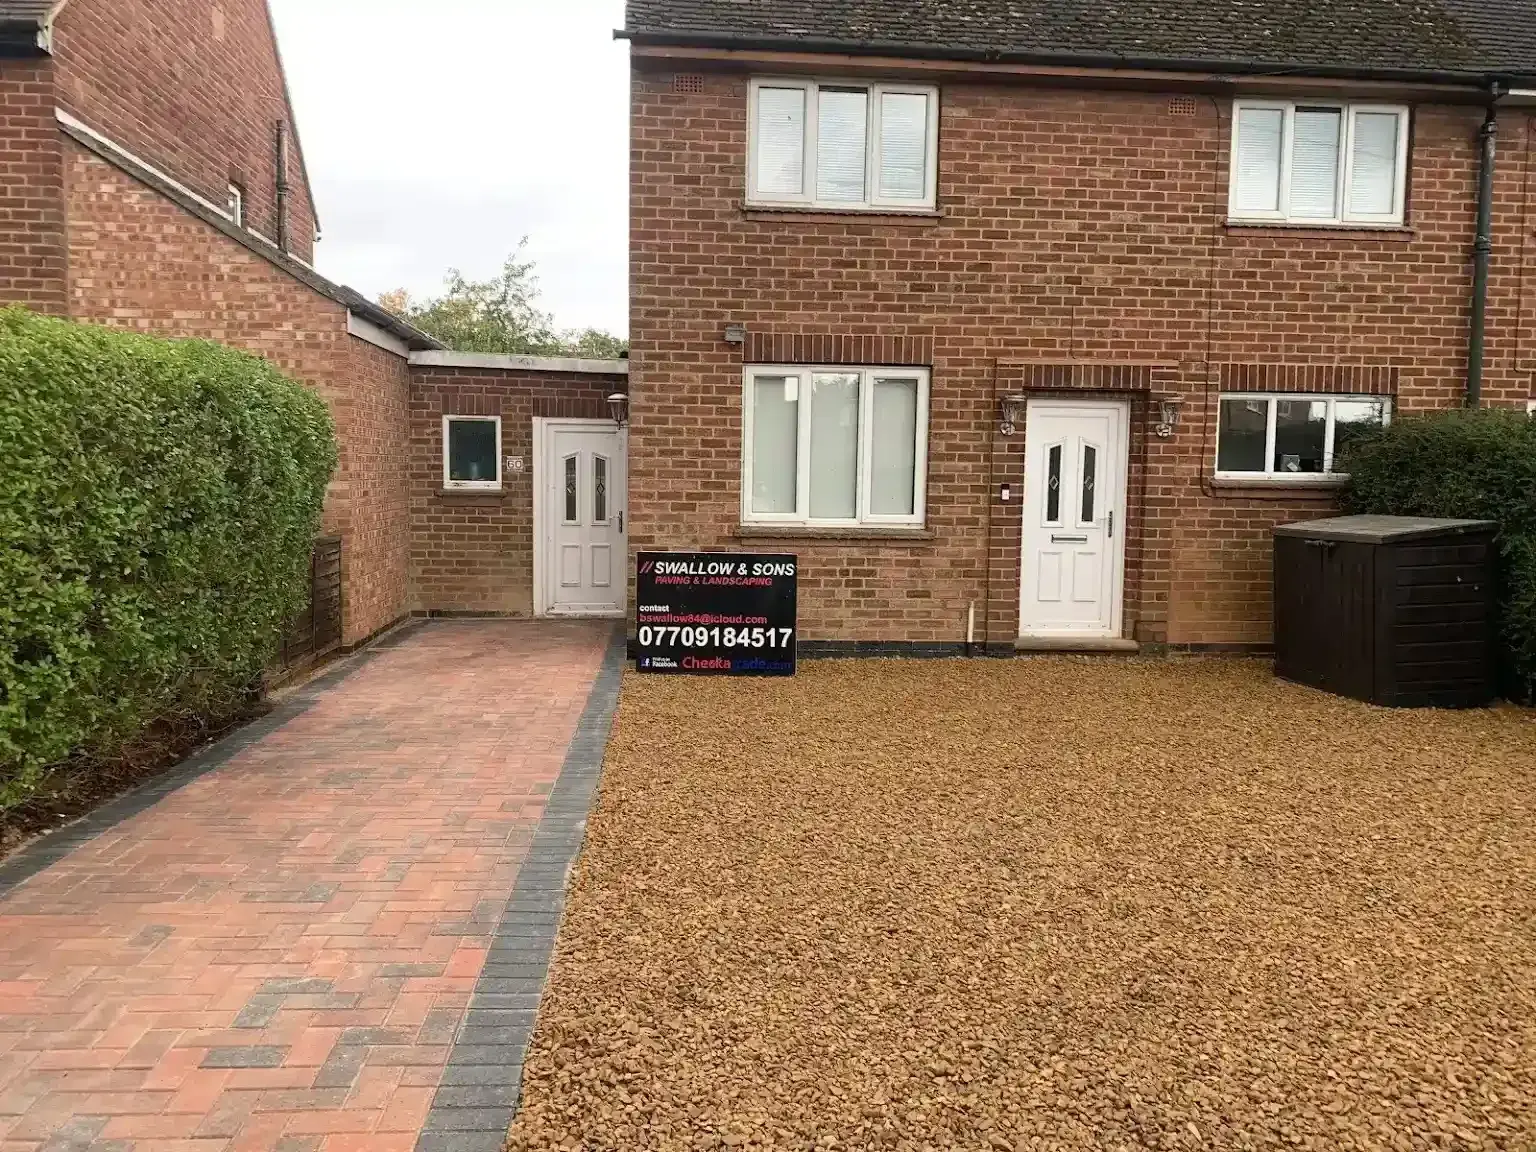 Paving And Landscaping Contractors In Northampton 02